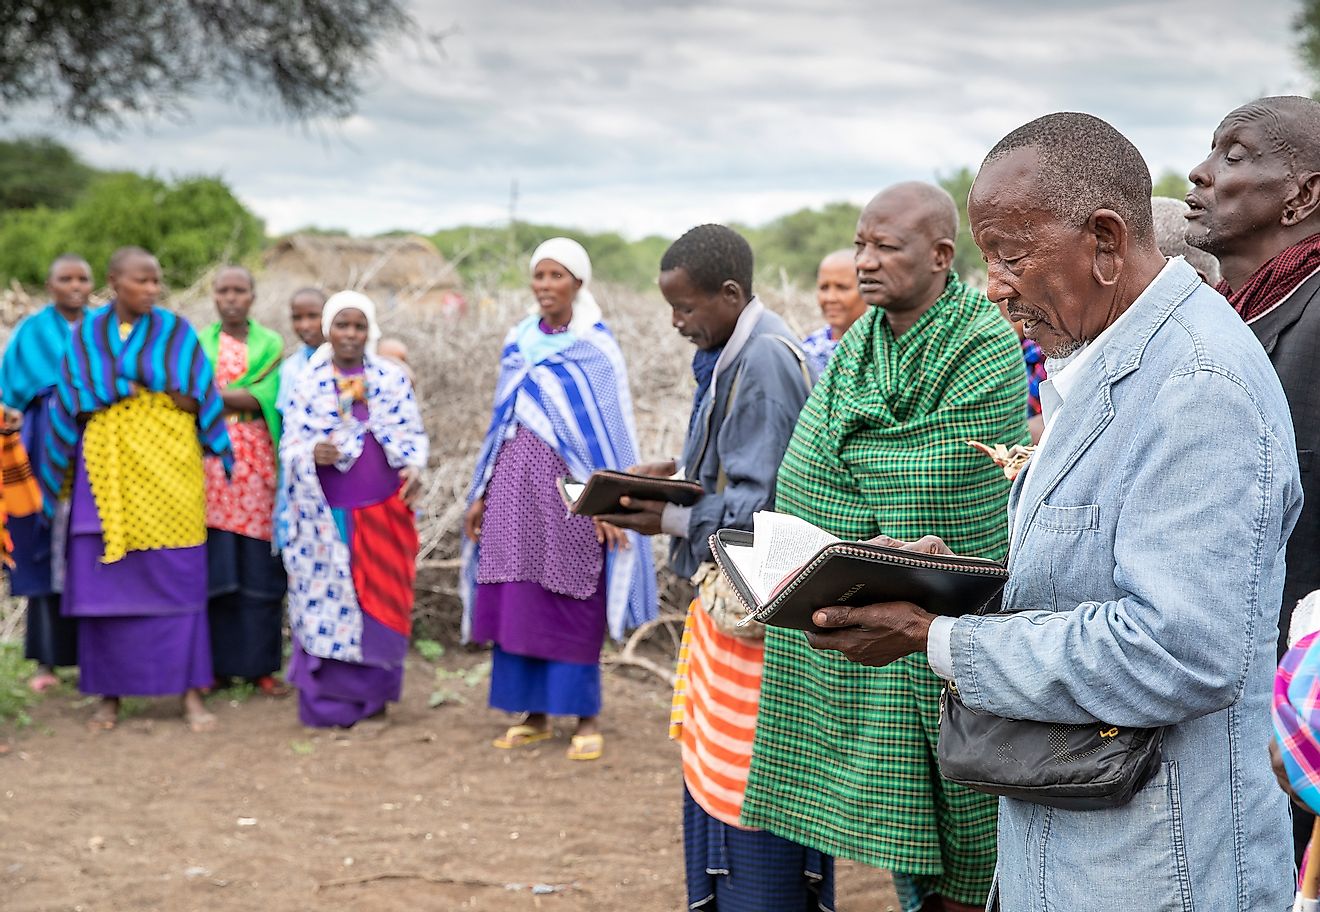 A group of Tanzanians observing a Christian religious ceremony. Image credit: Katiekk/Shutterstock.com